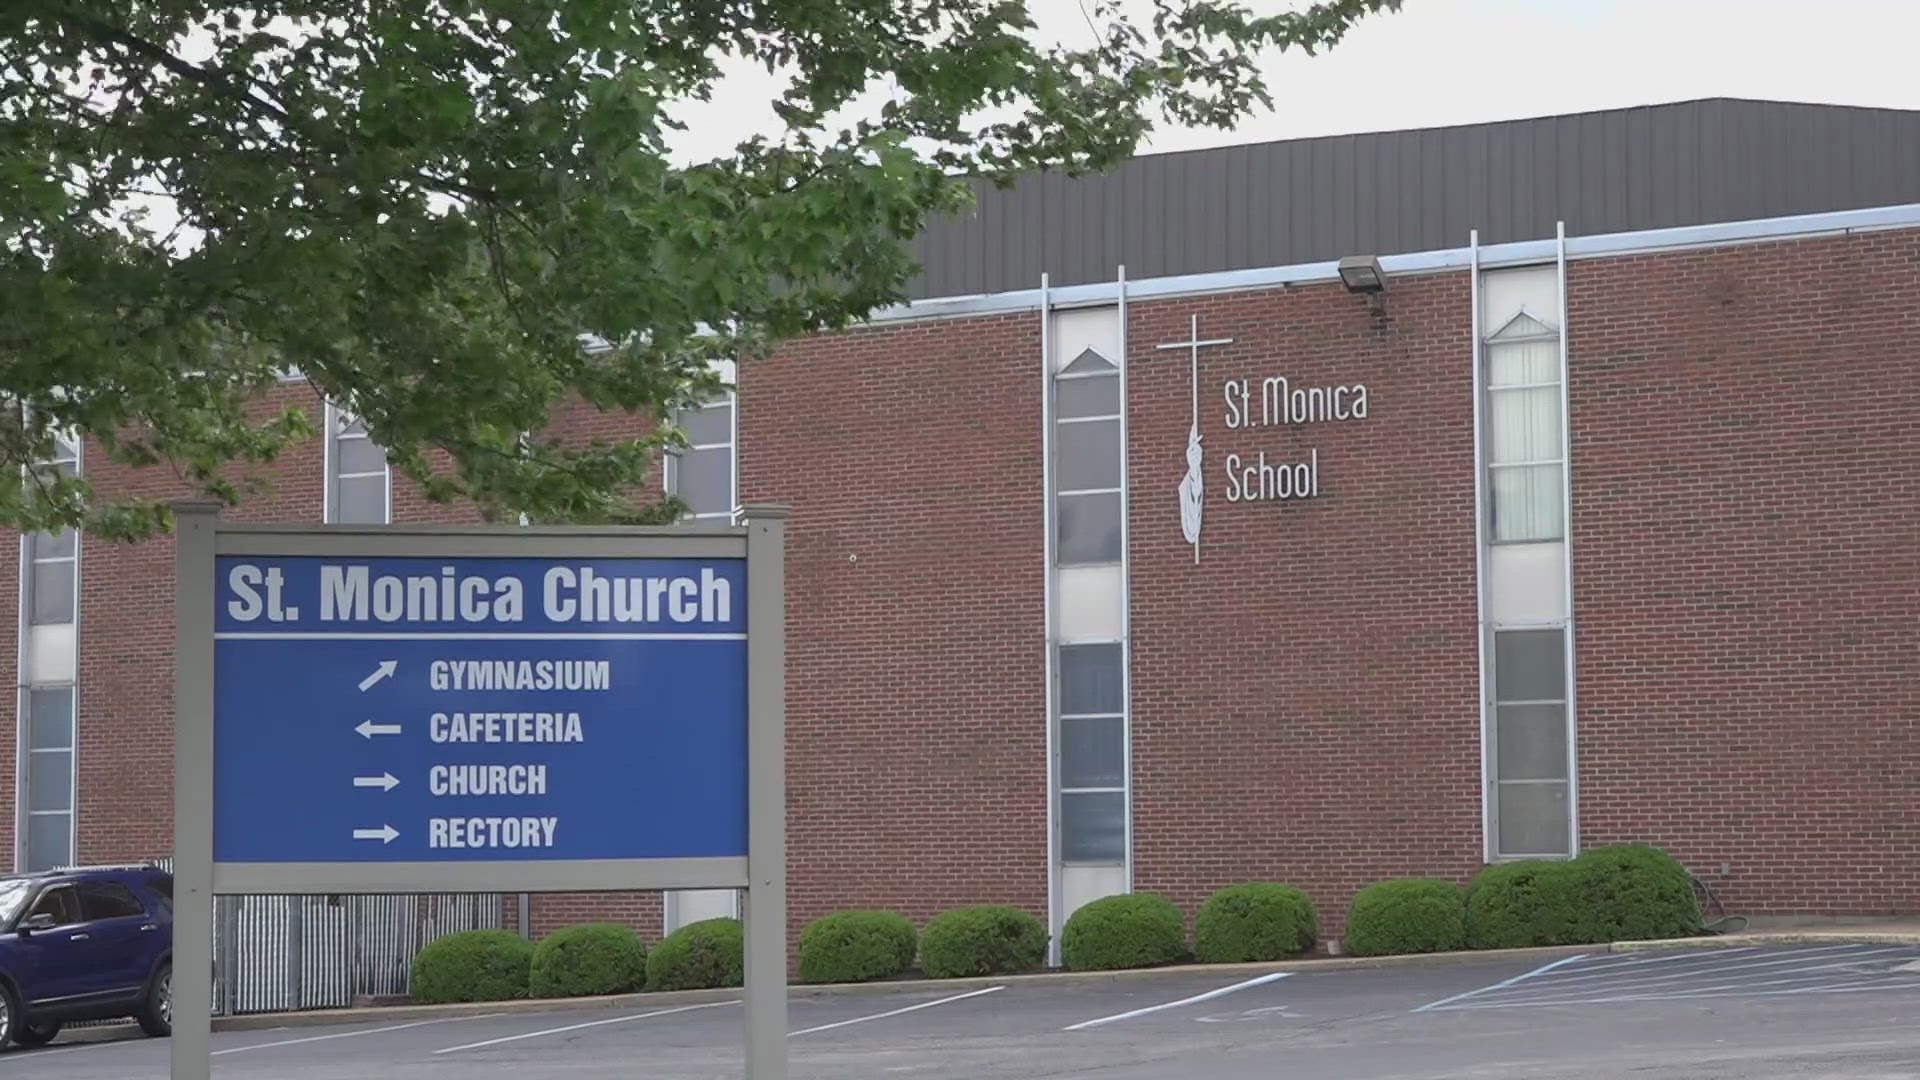 Parents and parishioners at St. Monica Catholic School are appealing a decision to close their school. Parents have organized a rally outside the school on Friday.